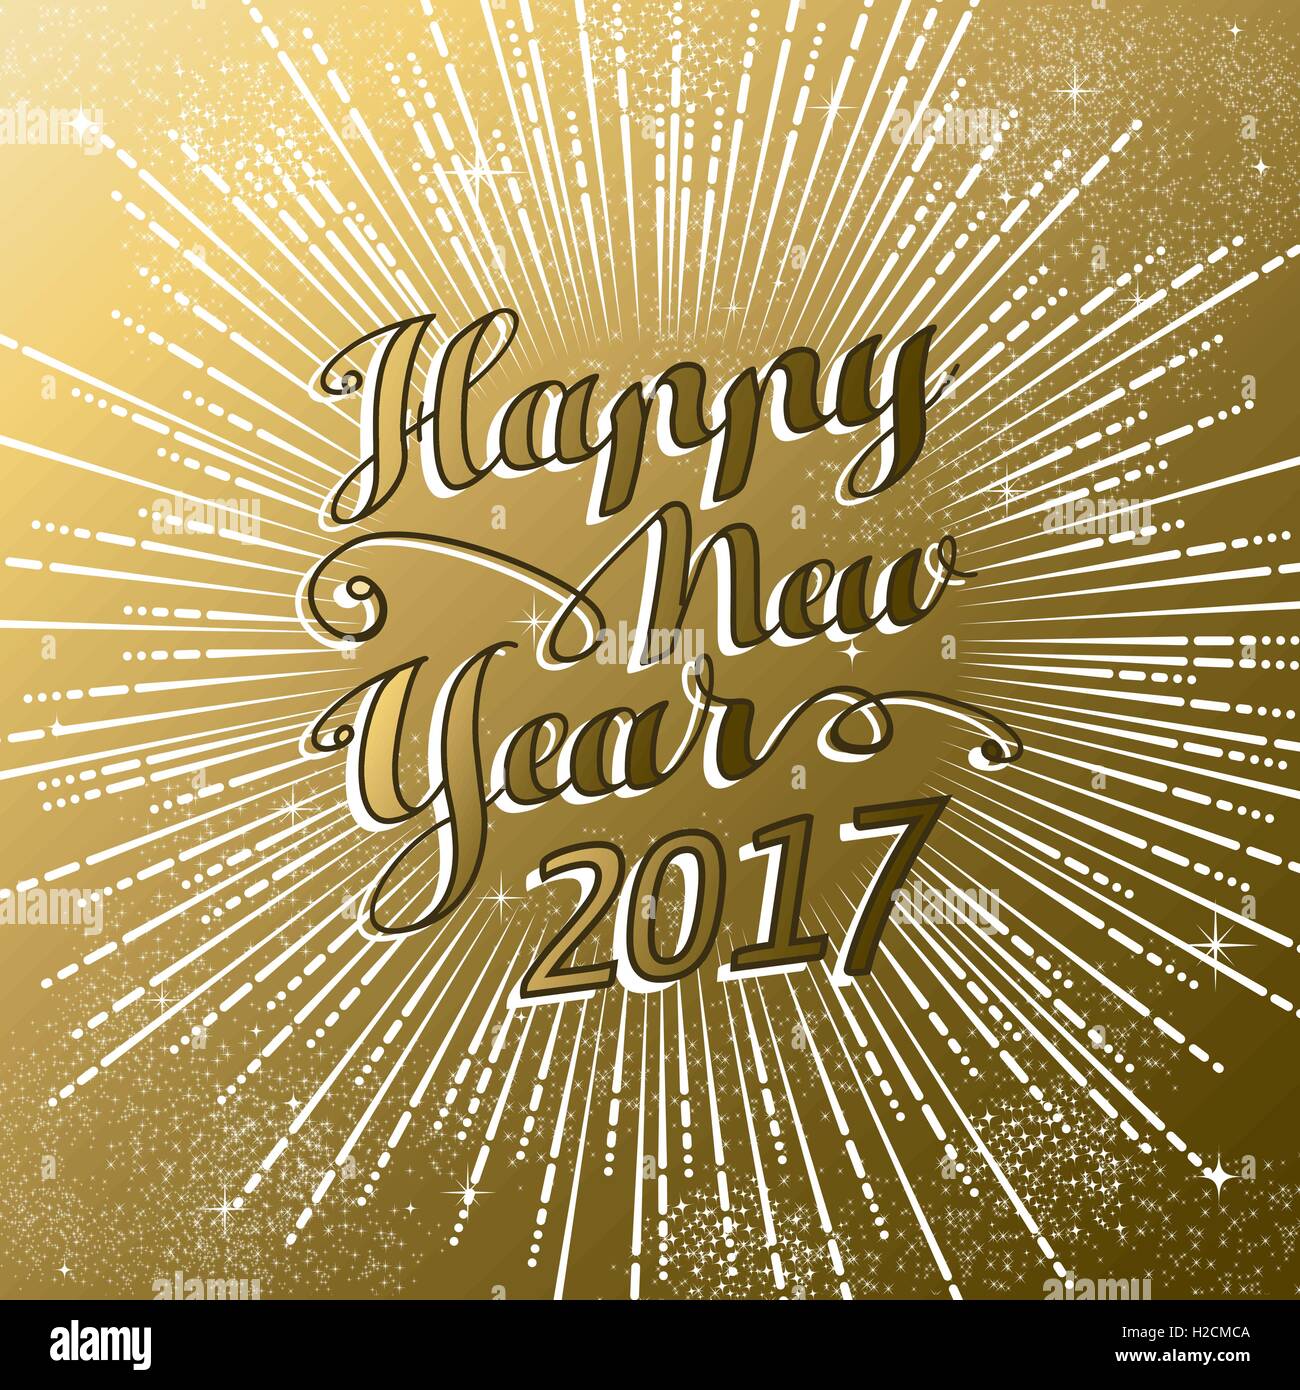 Happy New Year 2017 gold background with text quote and firework explosion. Luxury holiday greeting card design. EPS10 vector. Stock Vector